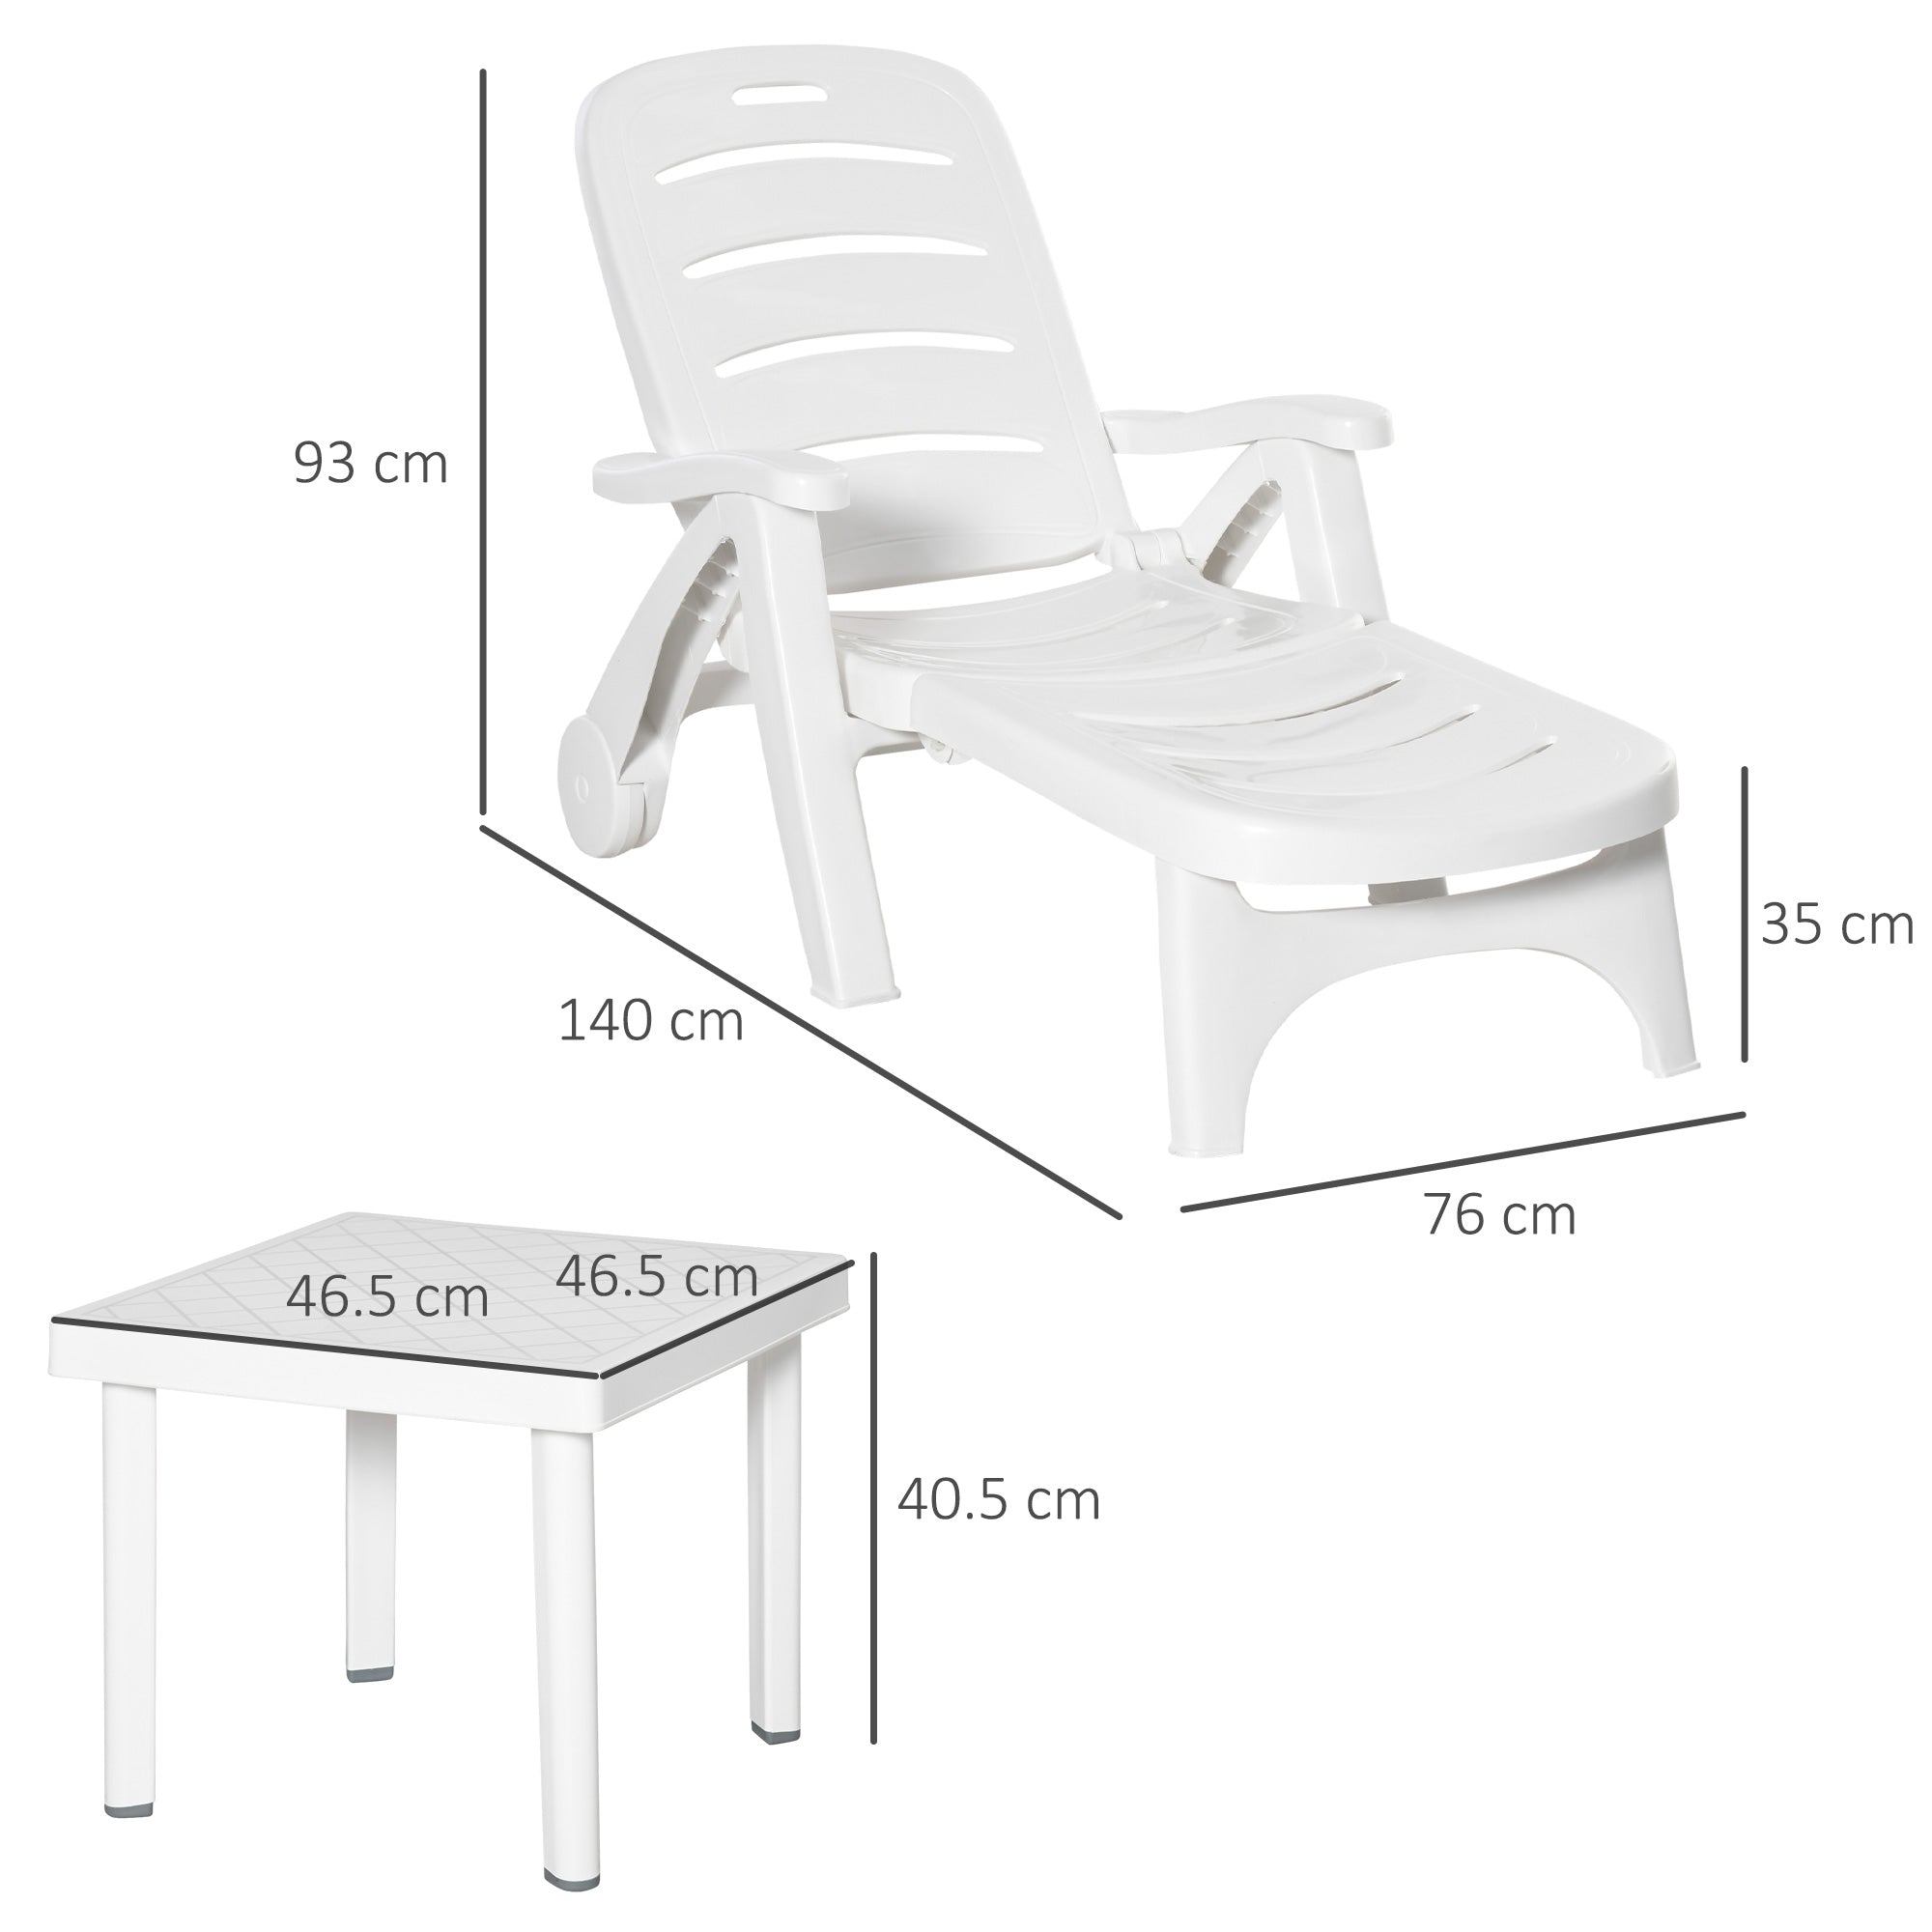 2pcs Garden Furniture Set Outdoor Furniture Set Dining Table, 1 Lounge Chair and 1 Garden Side Table White-2